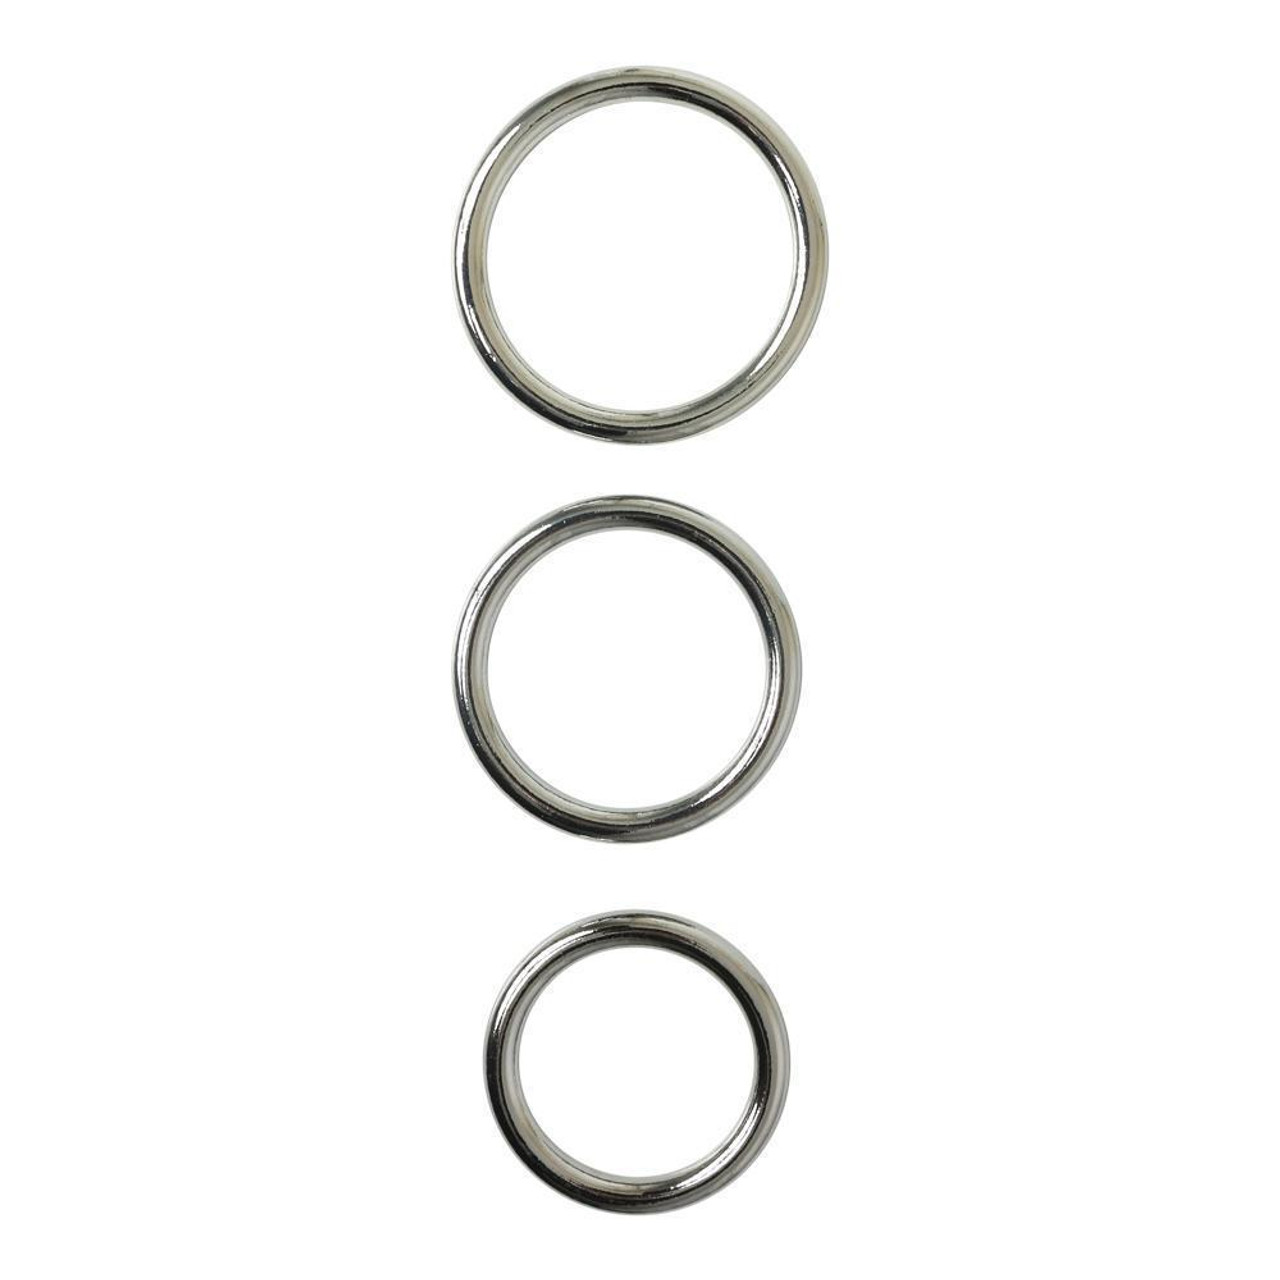 Sportsheets Metal O-Ring 3 Pack - Replacement Strap-on Rings